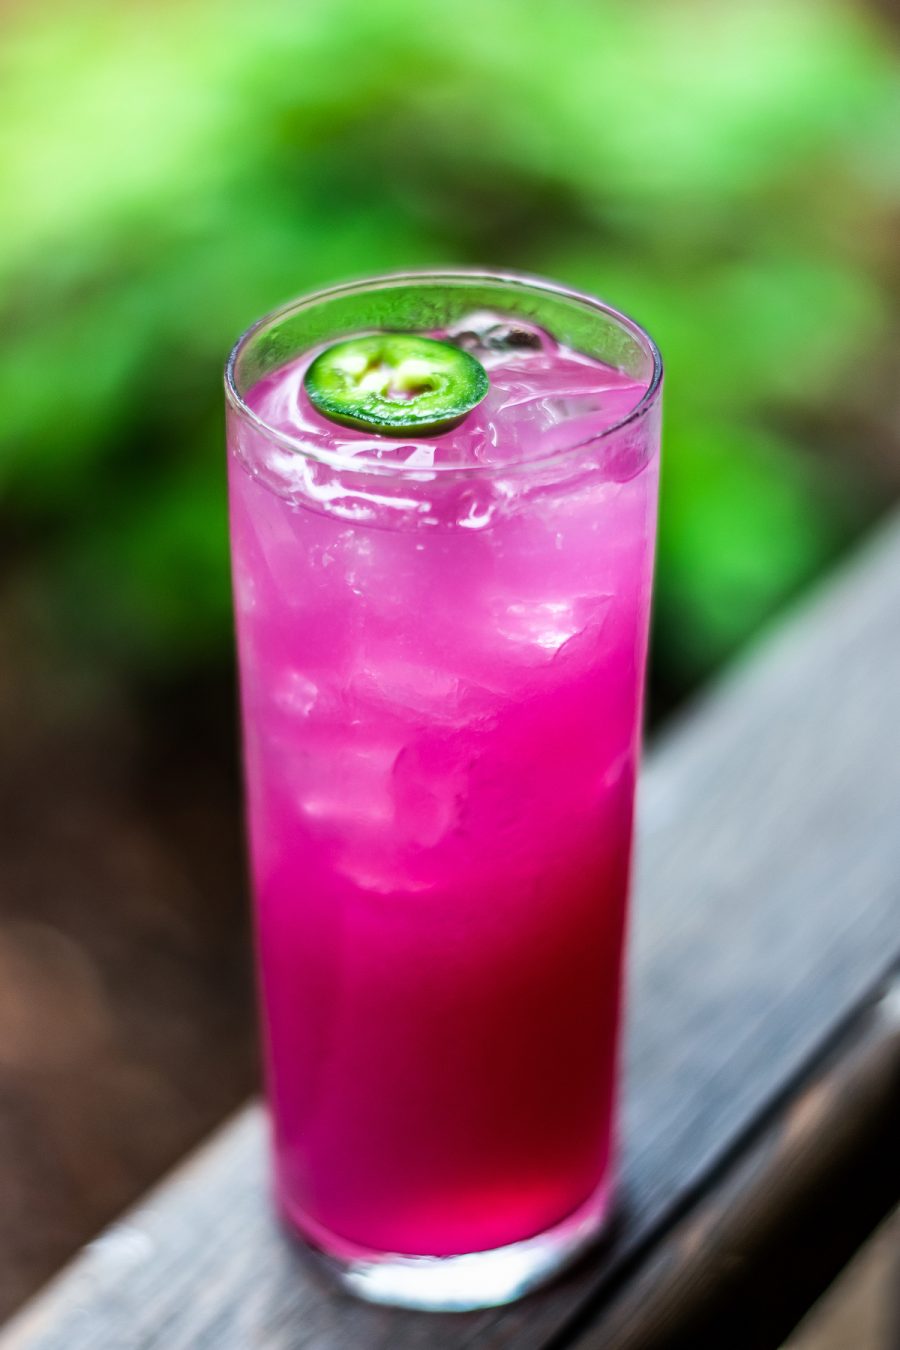 A bright pink cocktail from Cypress Social, one of the new restaurants in Arkansas